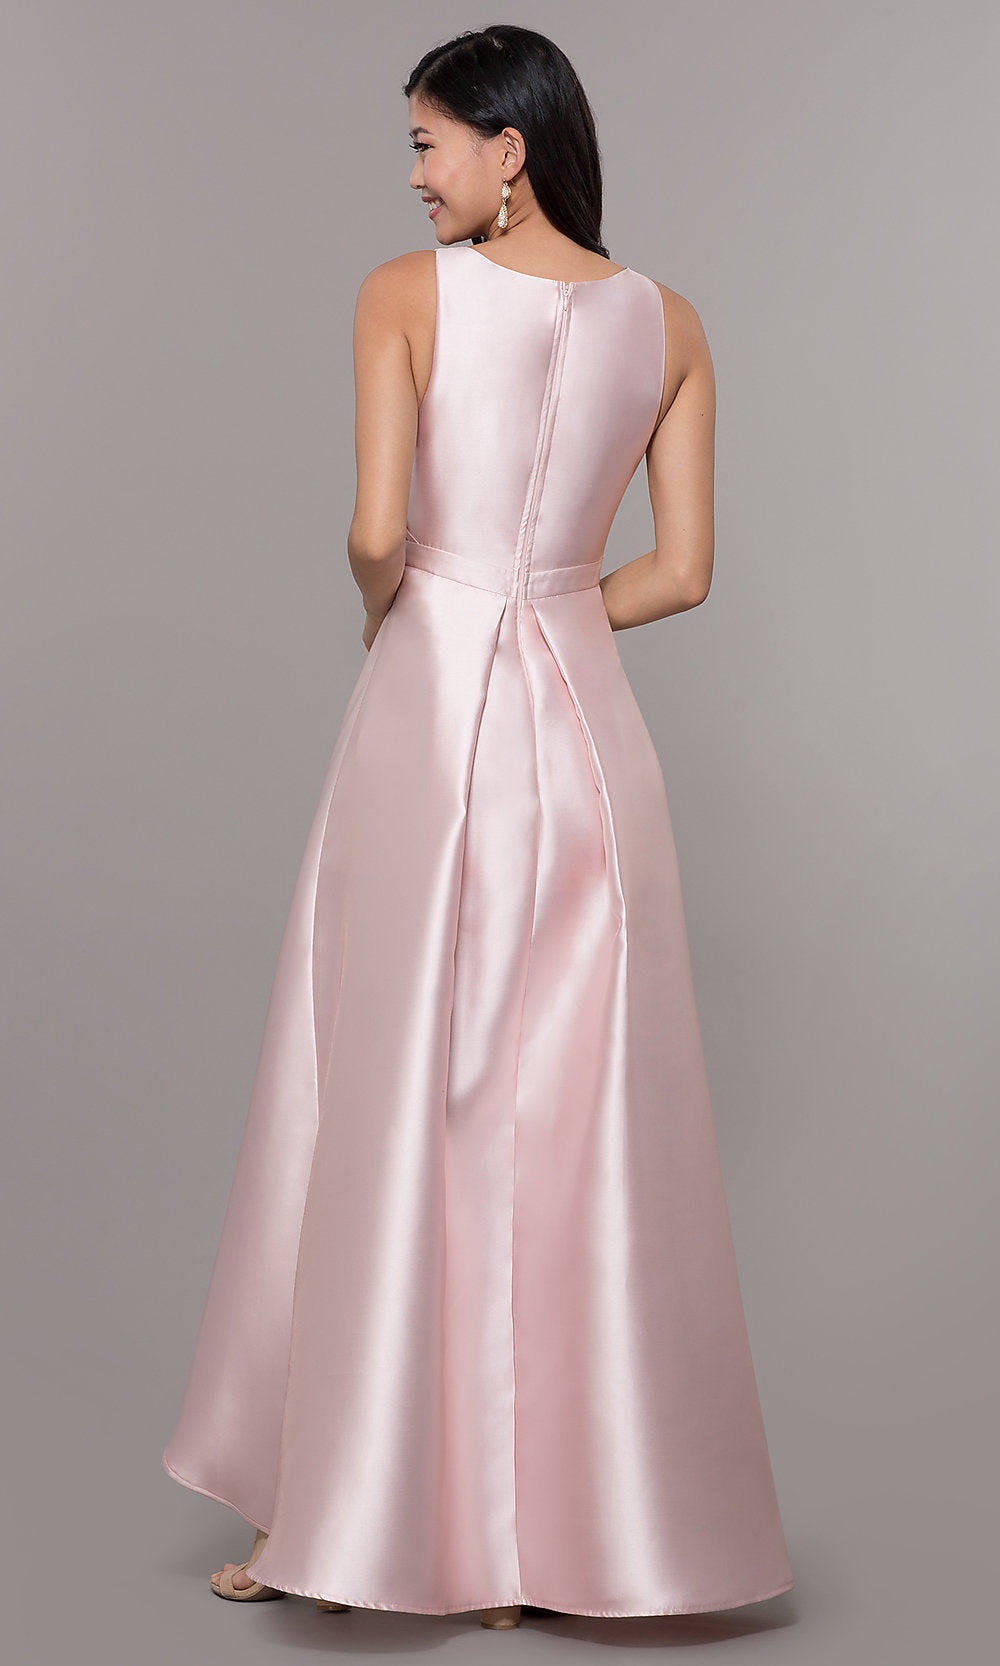 Satin V-Neck High-Low Prom Dress by PromGirl